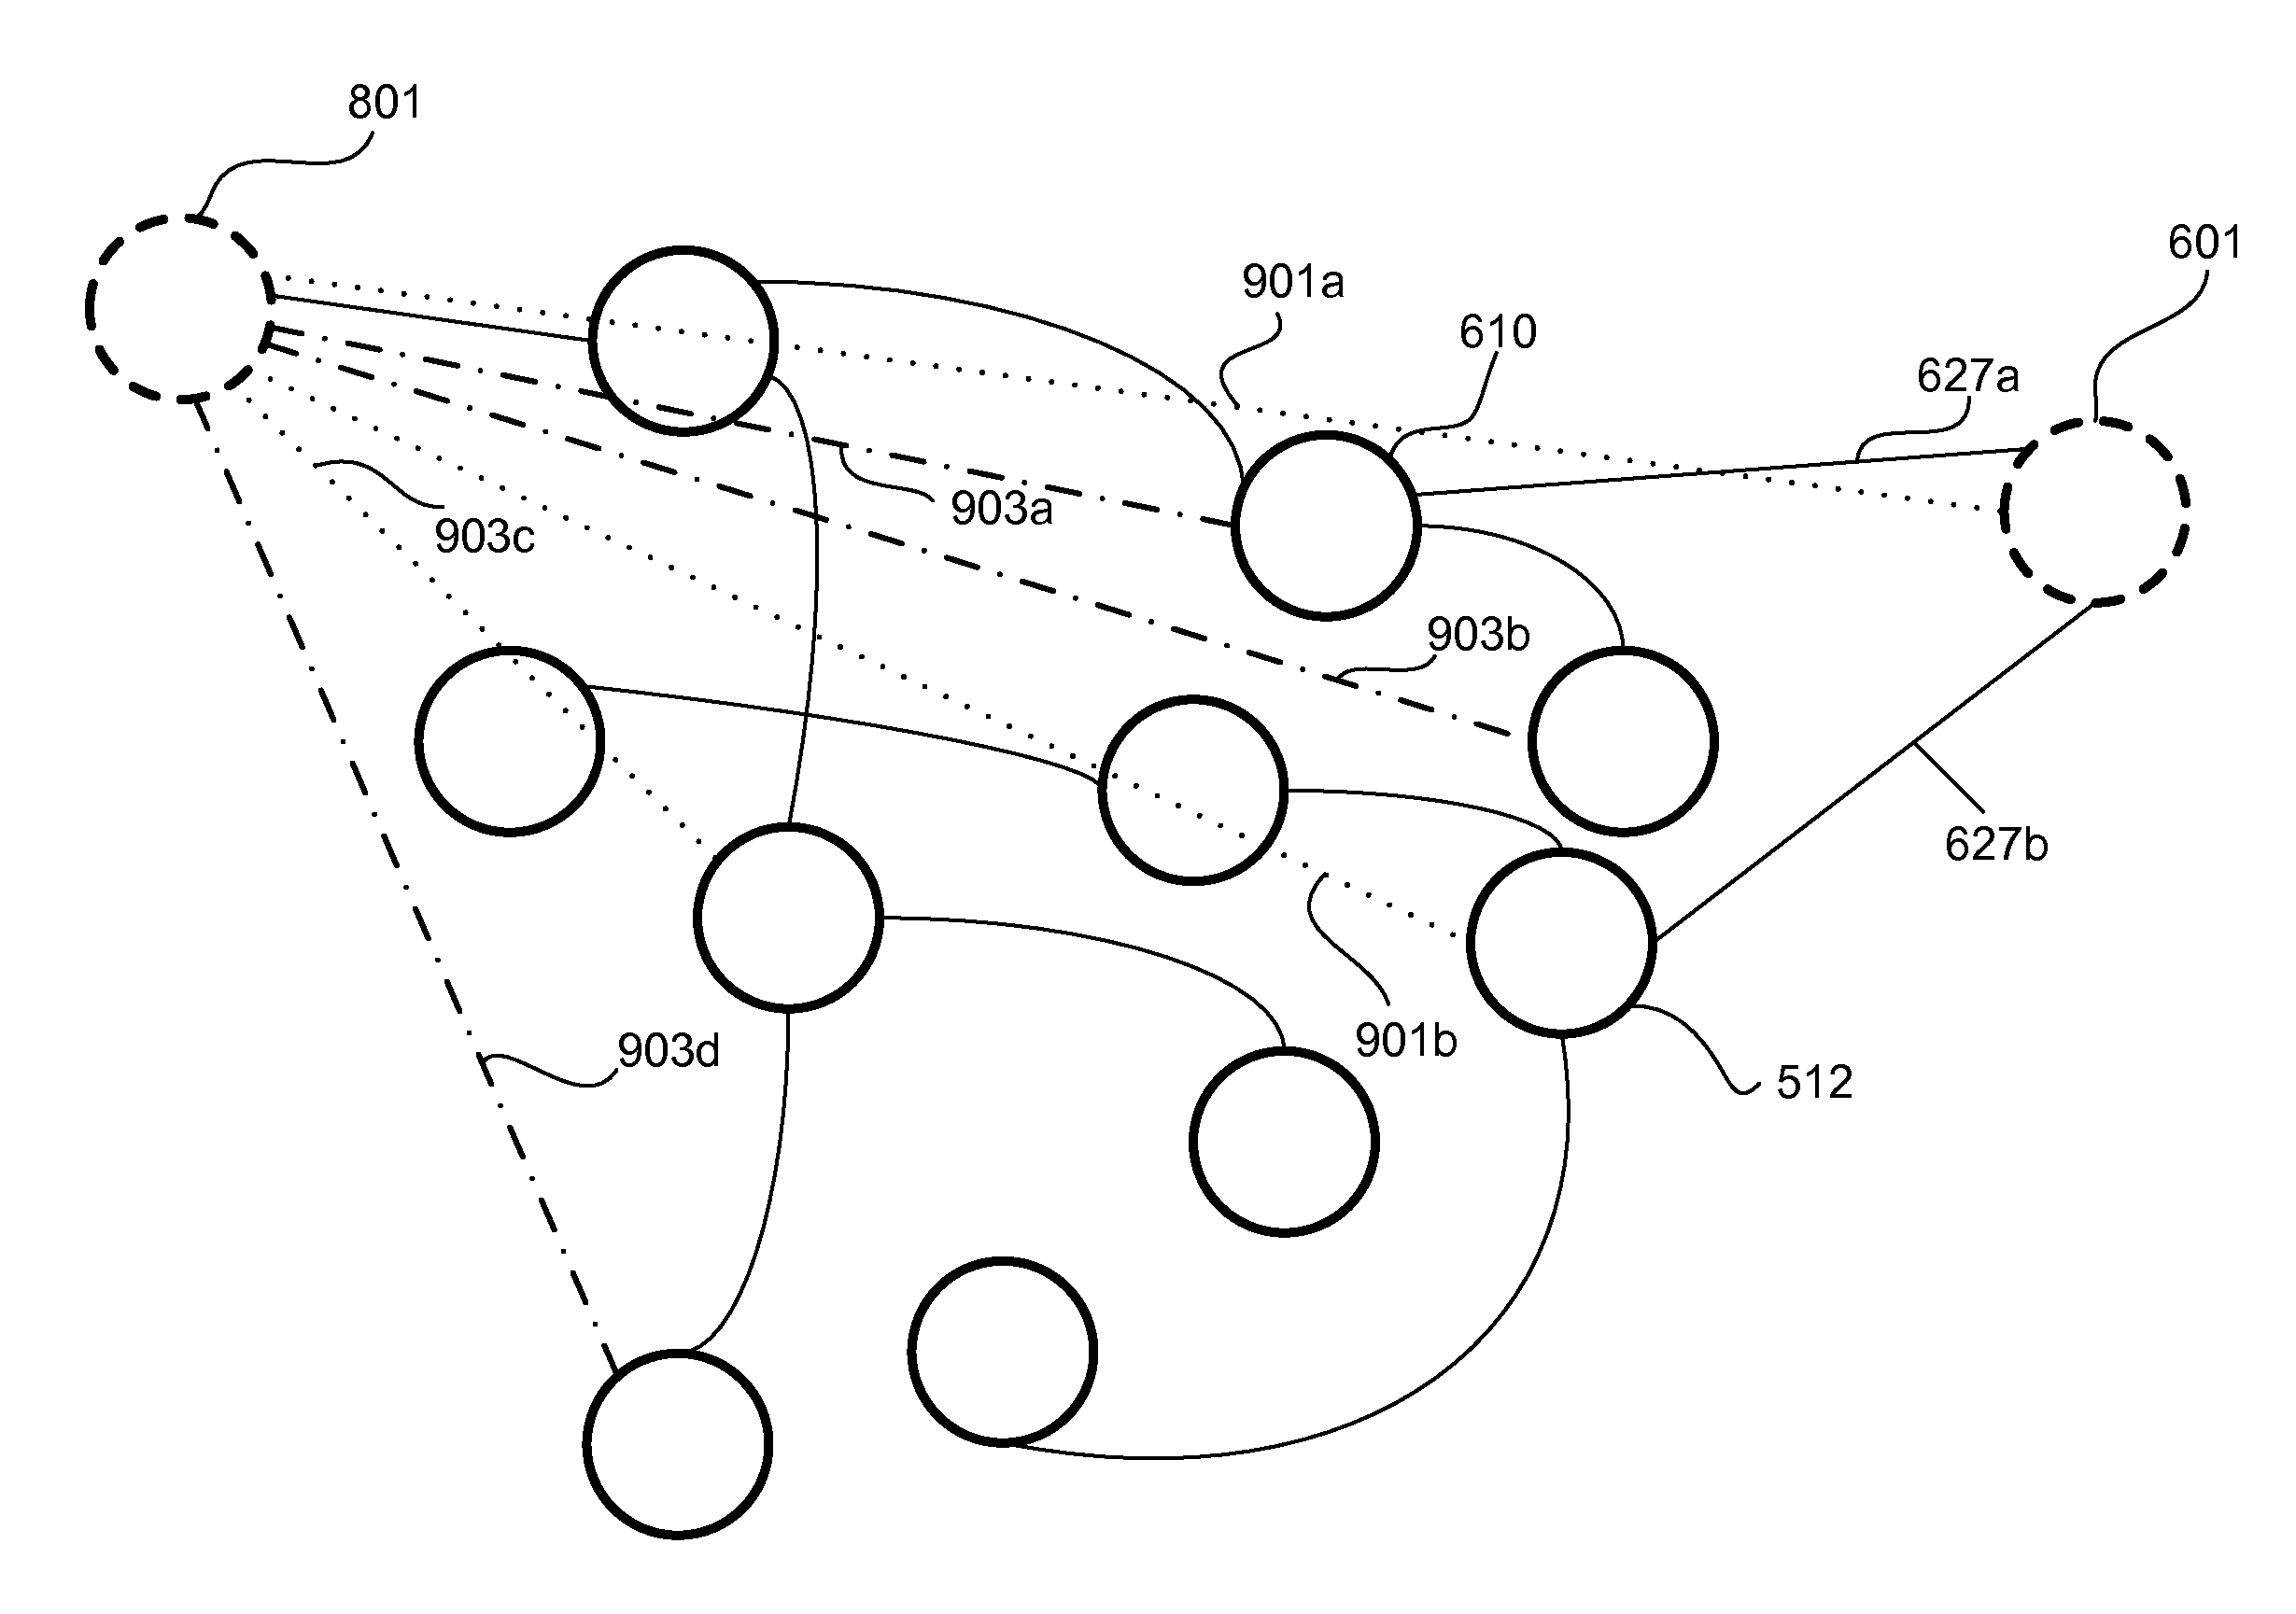 Altering weights of edges in a social graph